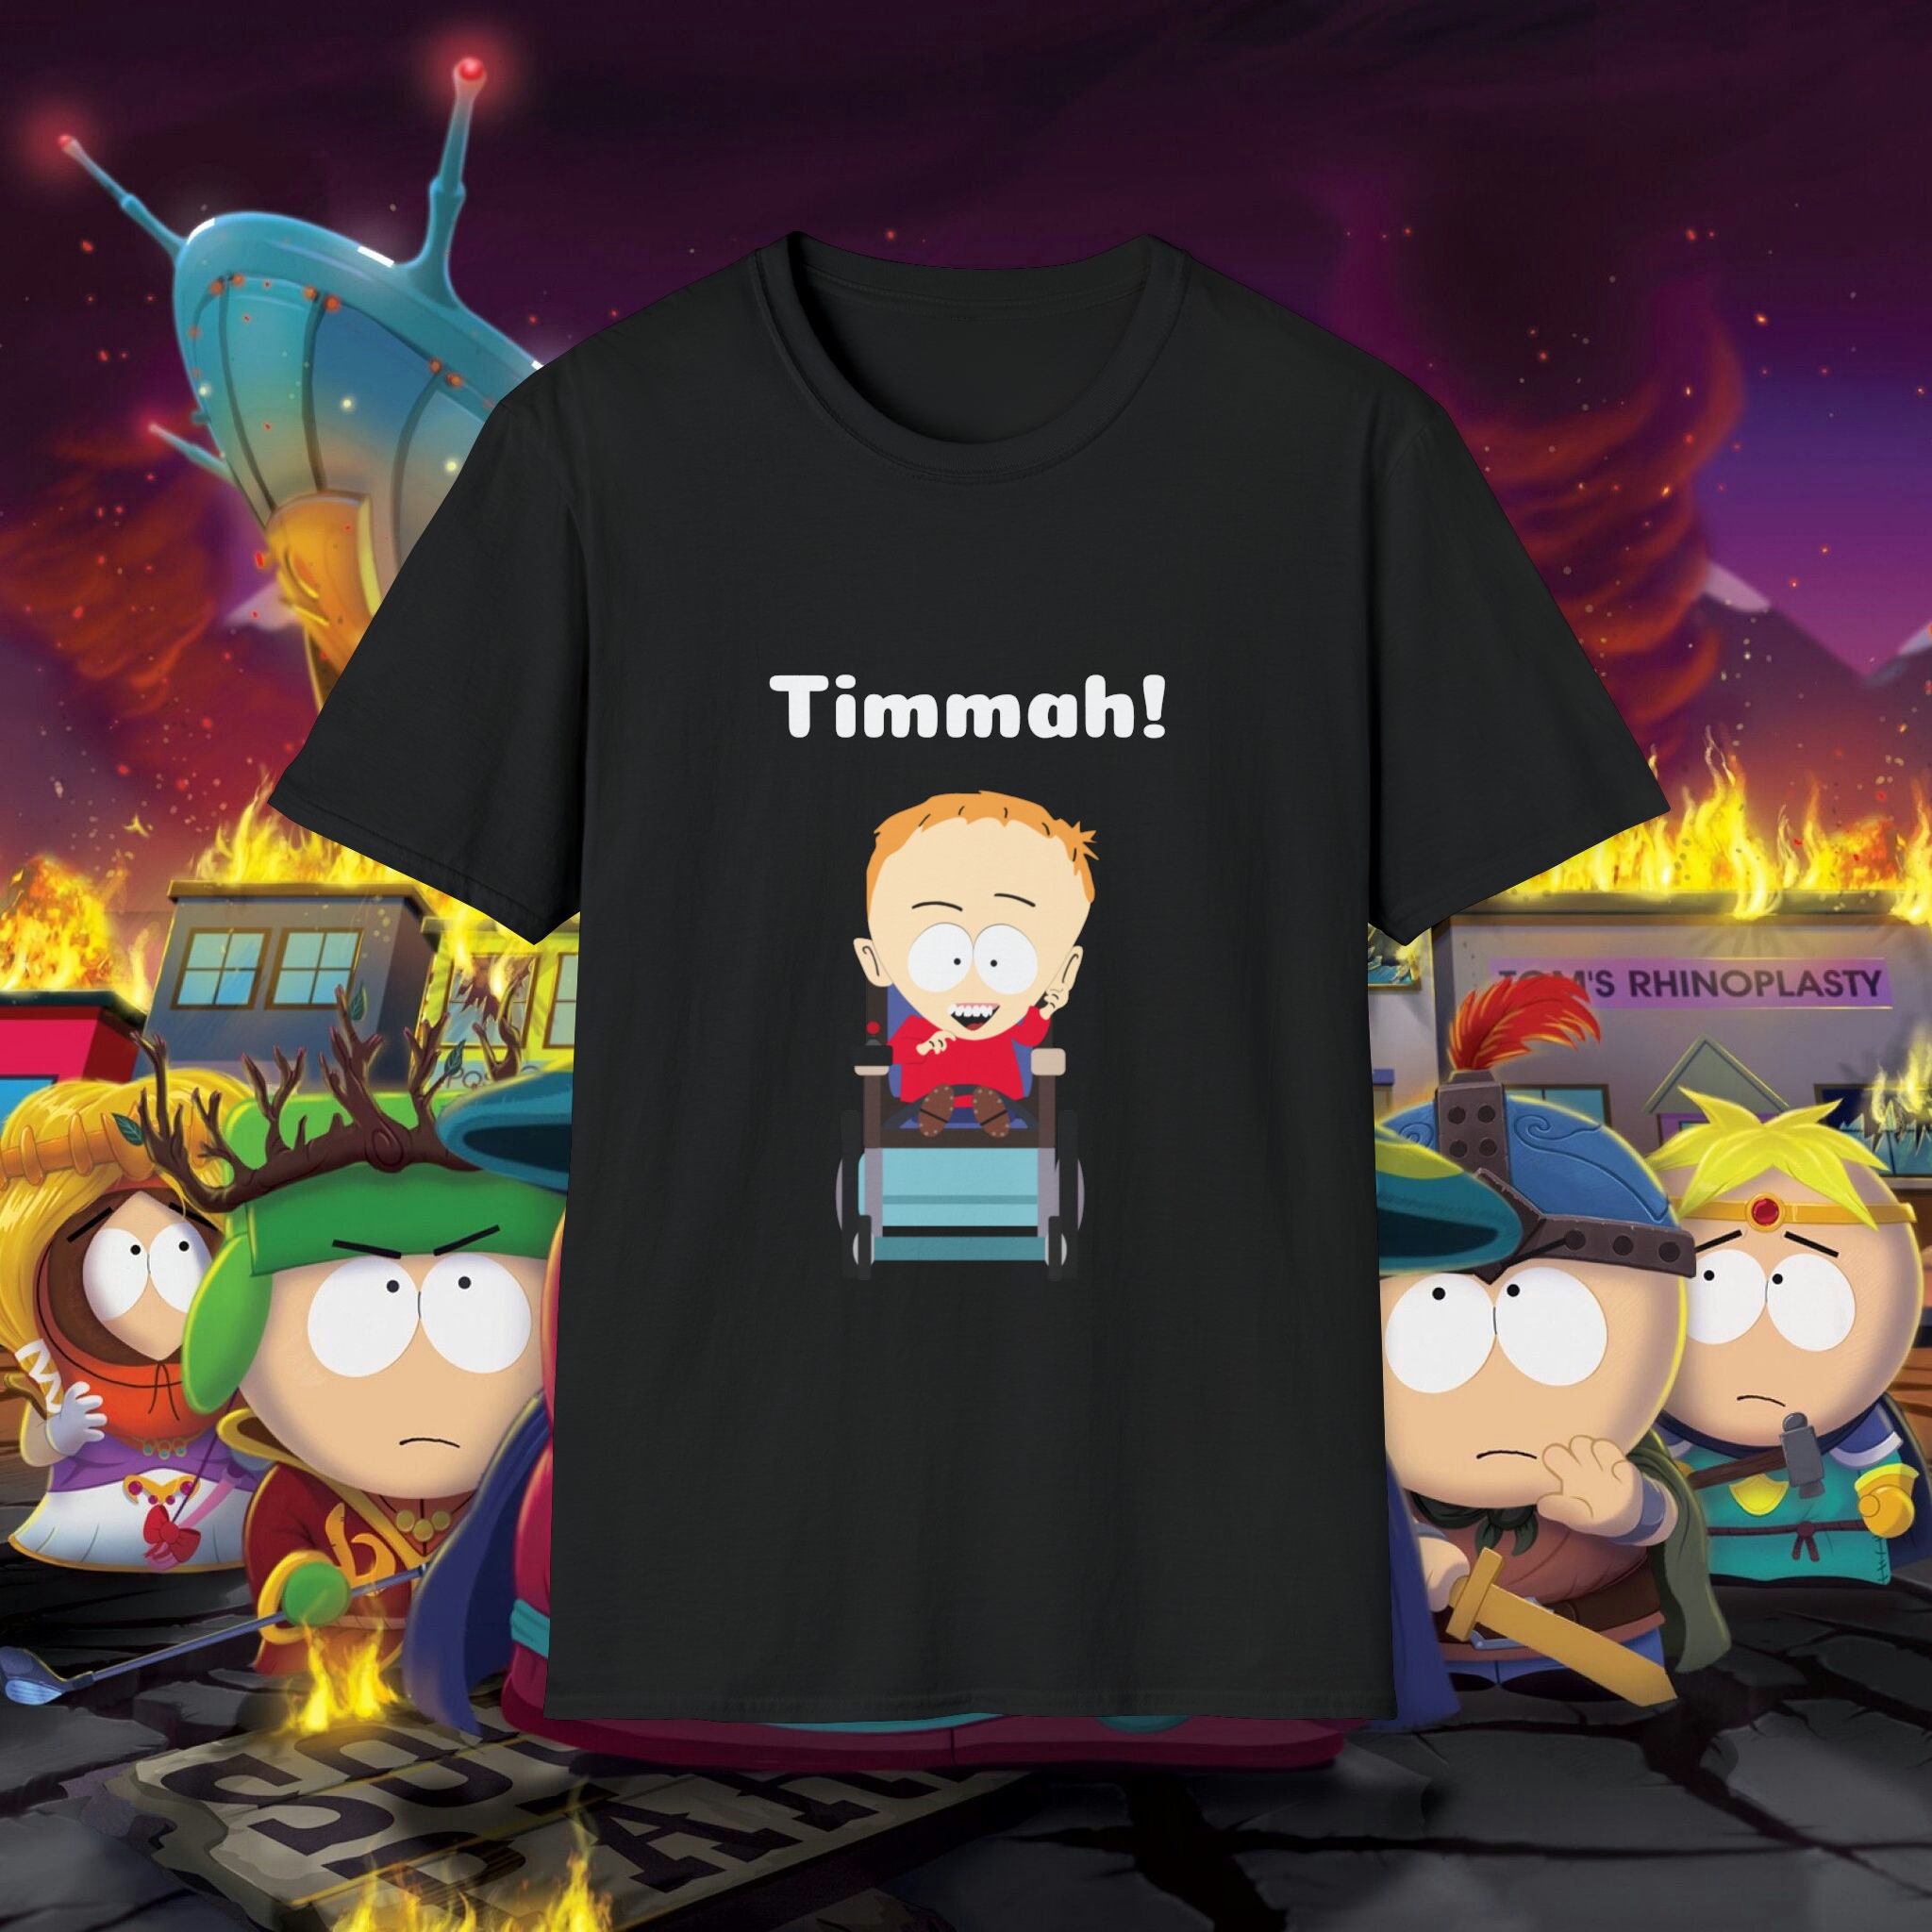 Tegridy Farms SHIRT Funny South Park UNISEX Streaming Wars Retro Christmas  Gift